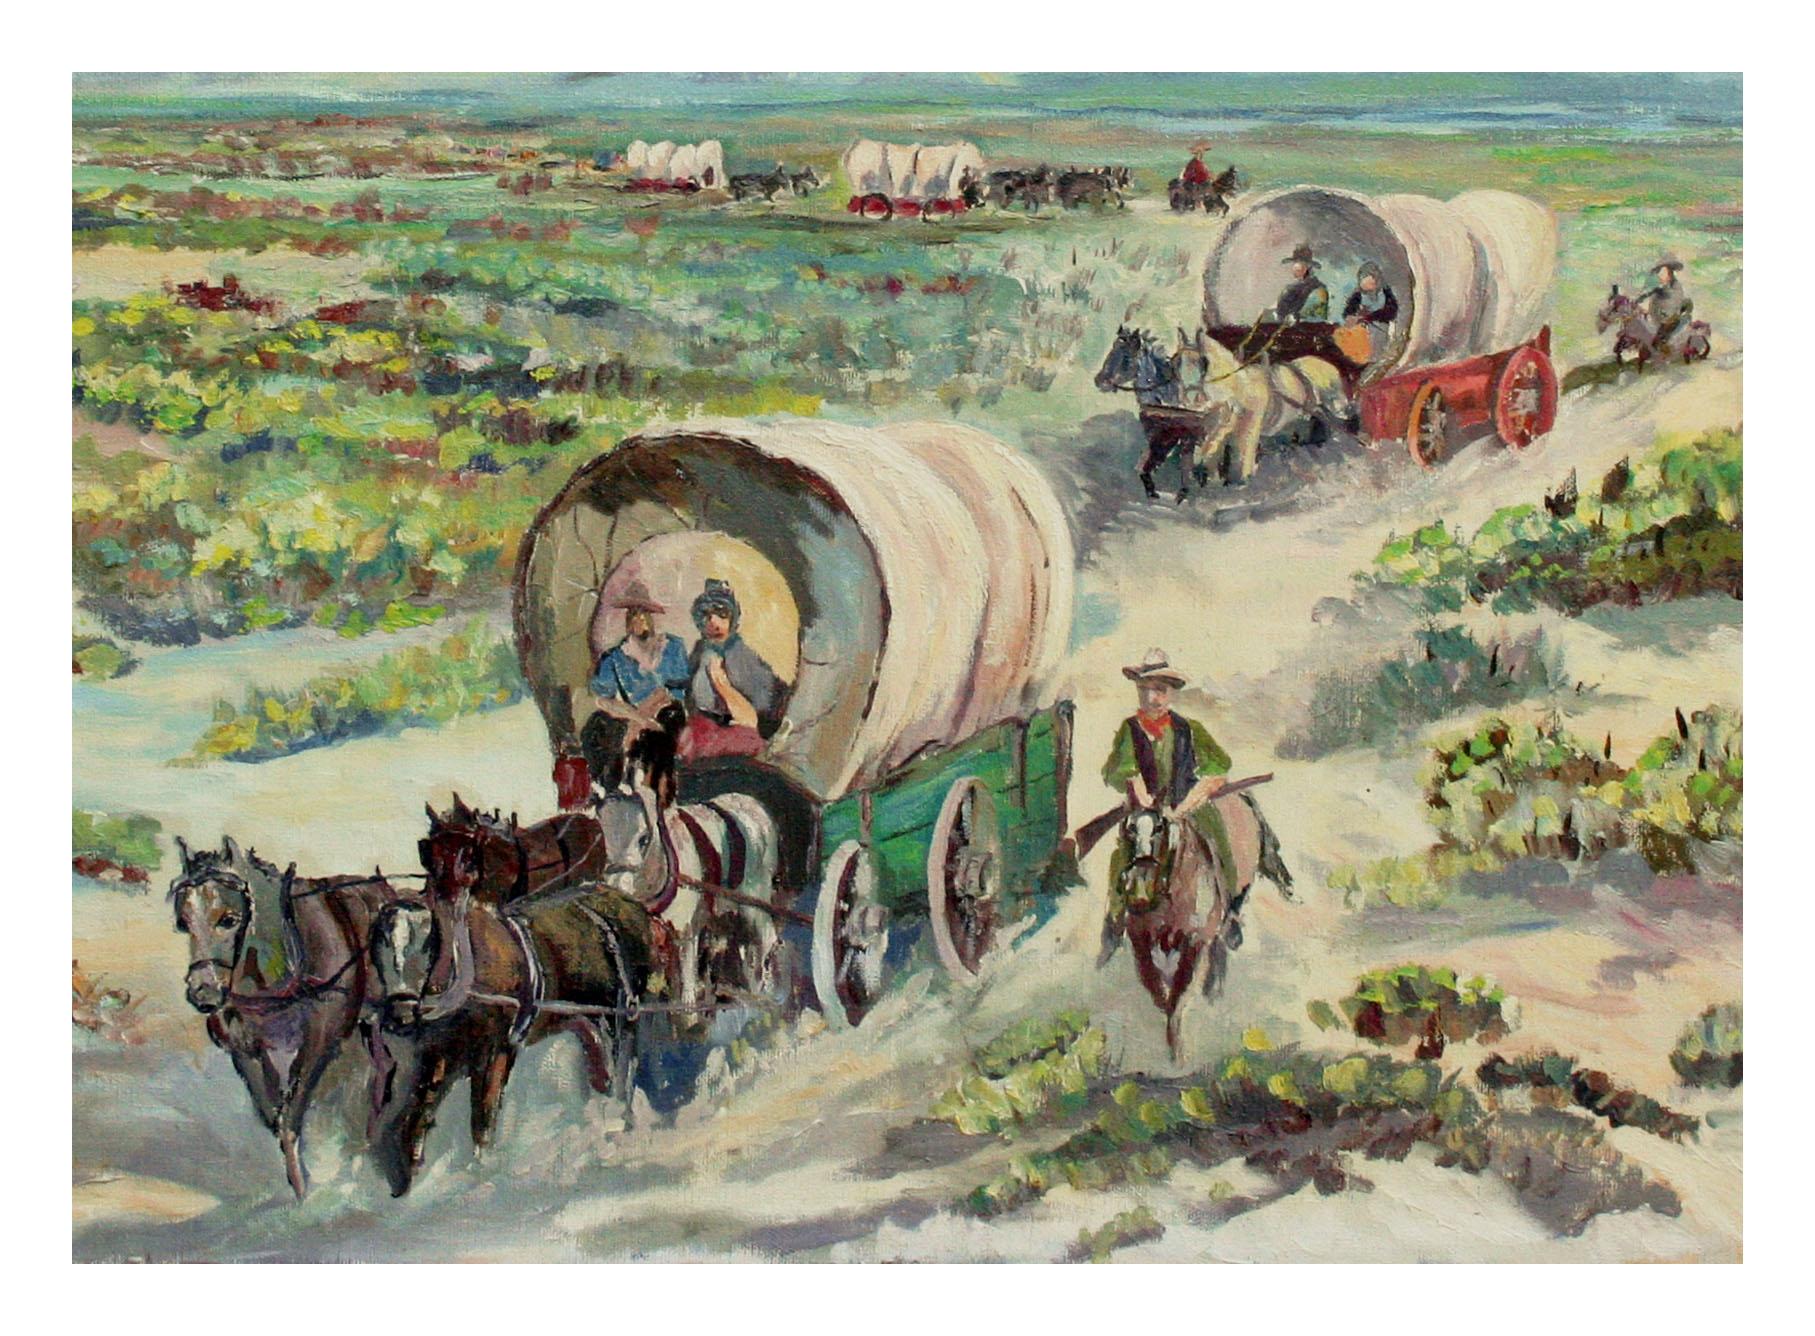 Oregon Trail, Vintage 1970s Western Figural Landscape - Painting by Harry Roerade